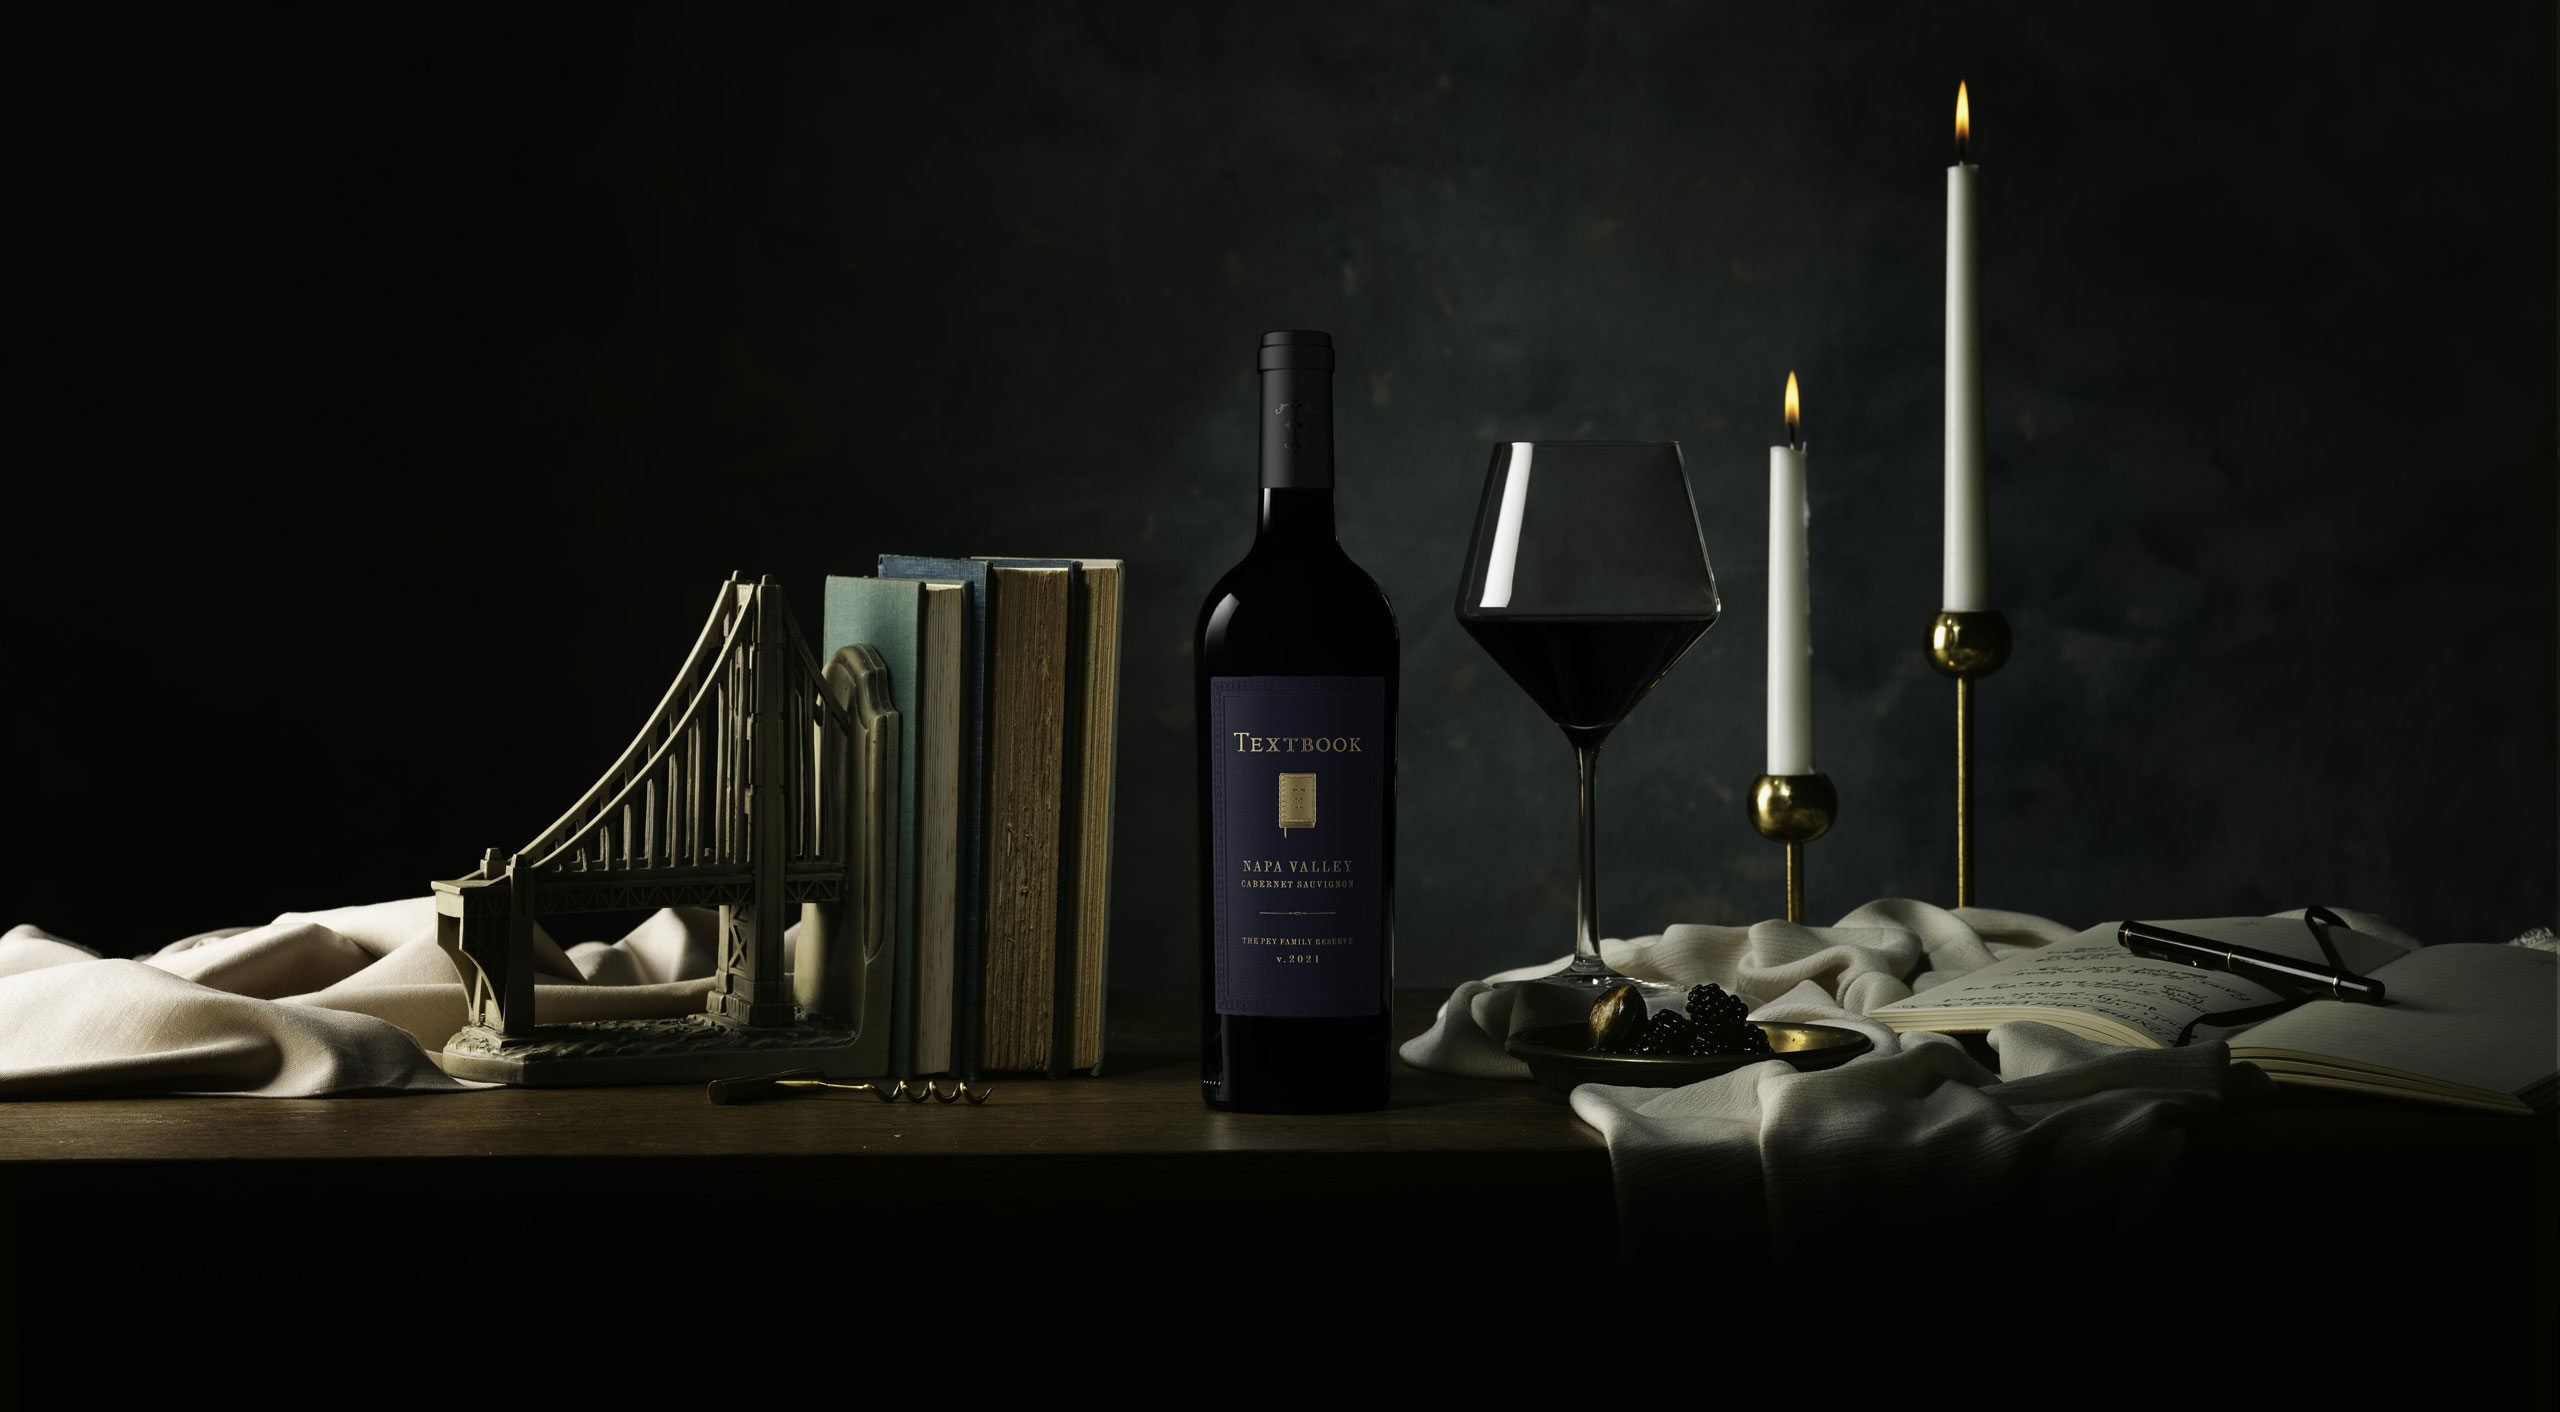 TEXTBOOK Reserve Cabernet bottle on table with books and a glass of red wine